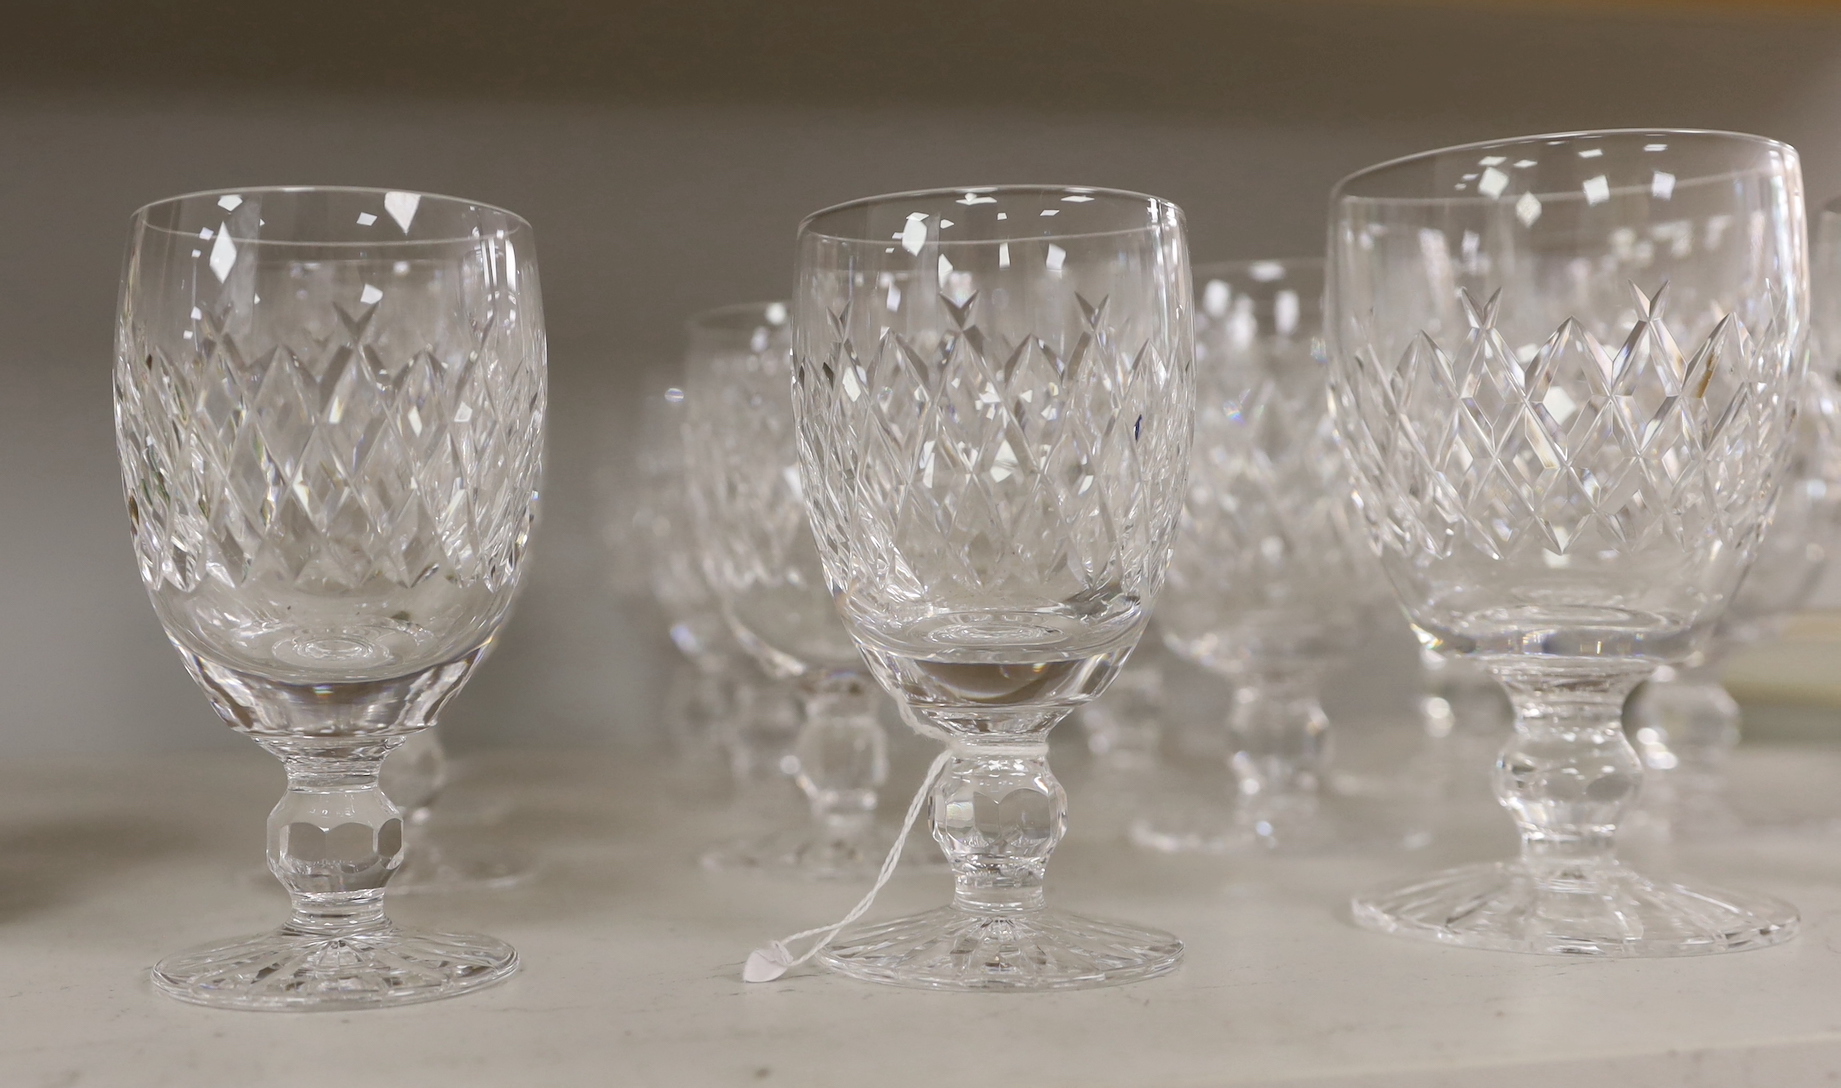 Sixteen Waterford crystal glasses, tallest 13cm high